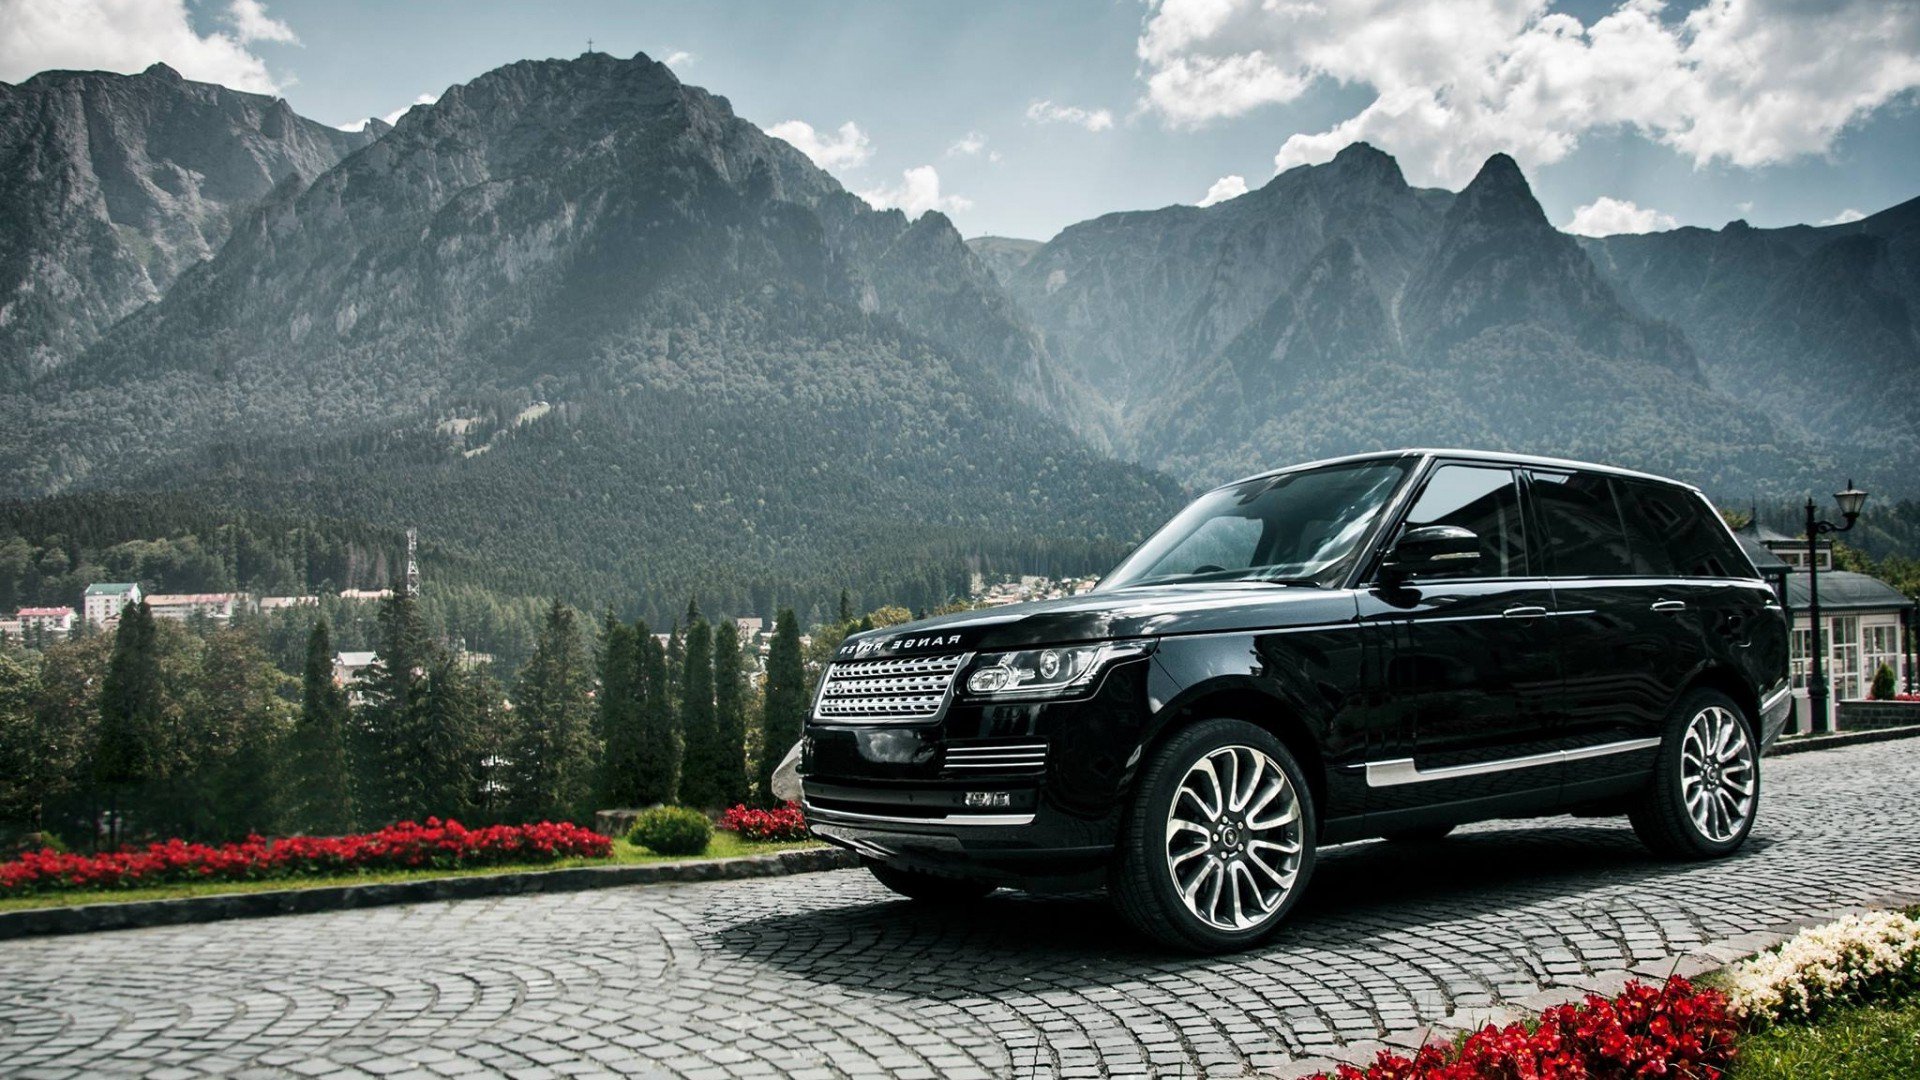 Range Rover Black, Hd Cars, 4K Wallpapers, Images, Backgrounds, Photos